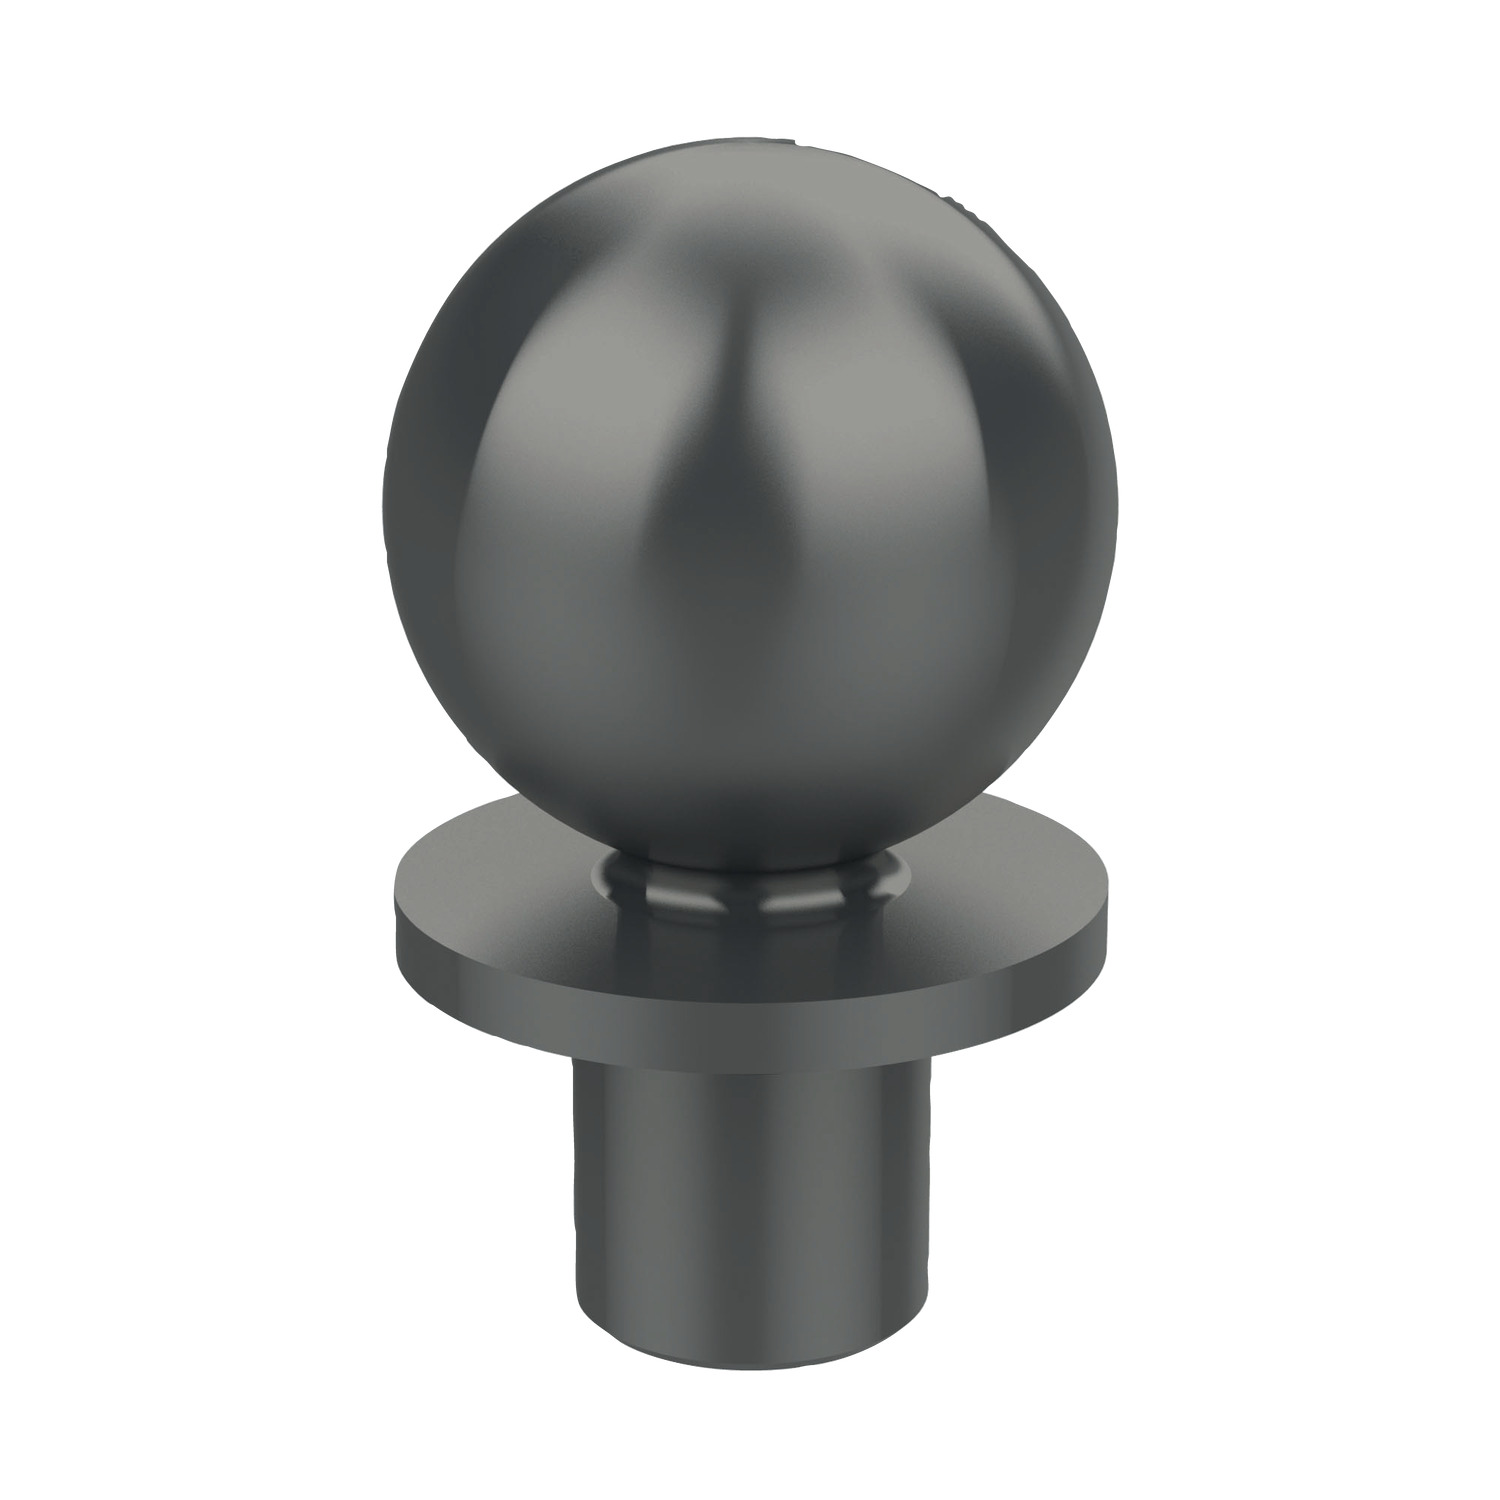 Product 20512, Construction Balls imperial and metric - shoulder type / 